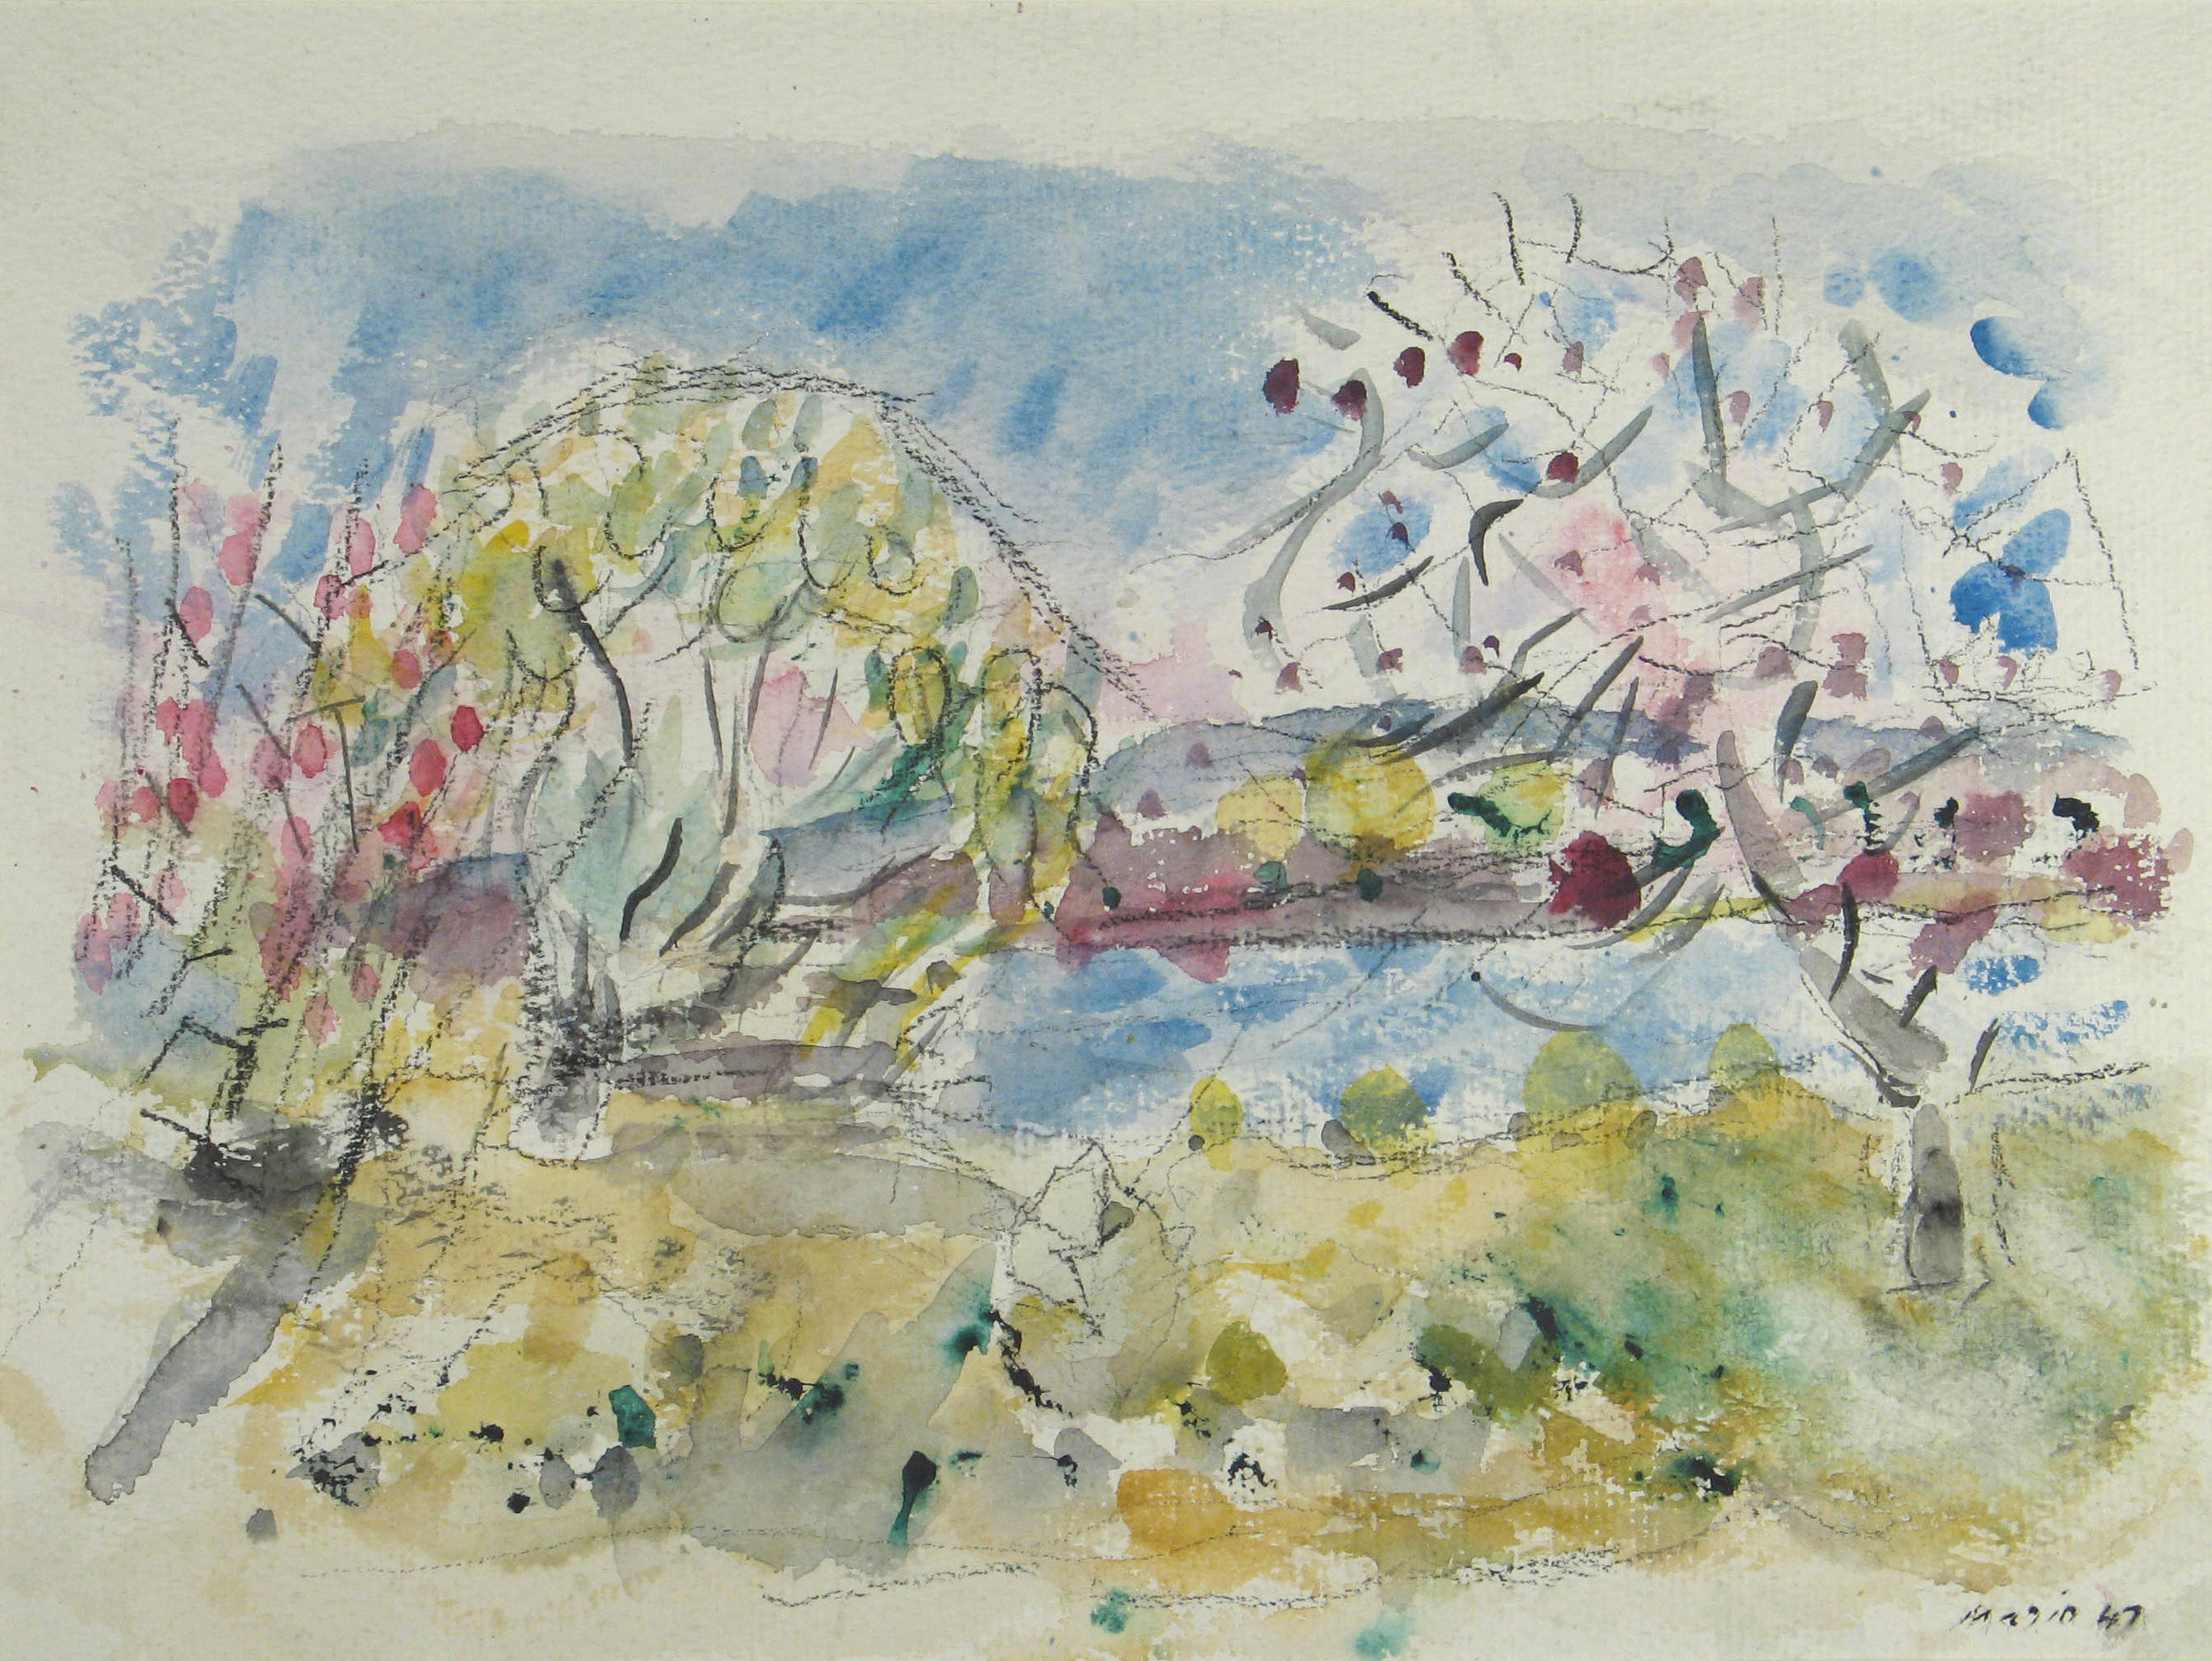 Watercolor of trees with pink blooms by the riverside